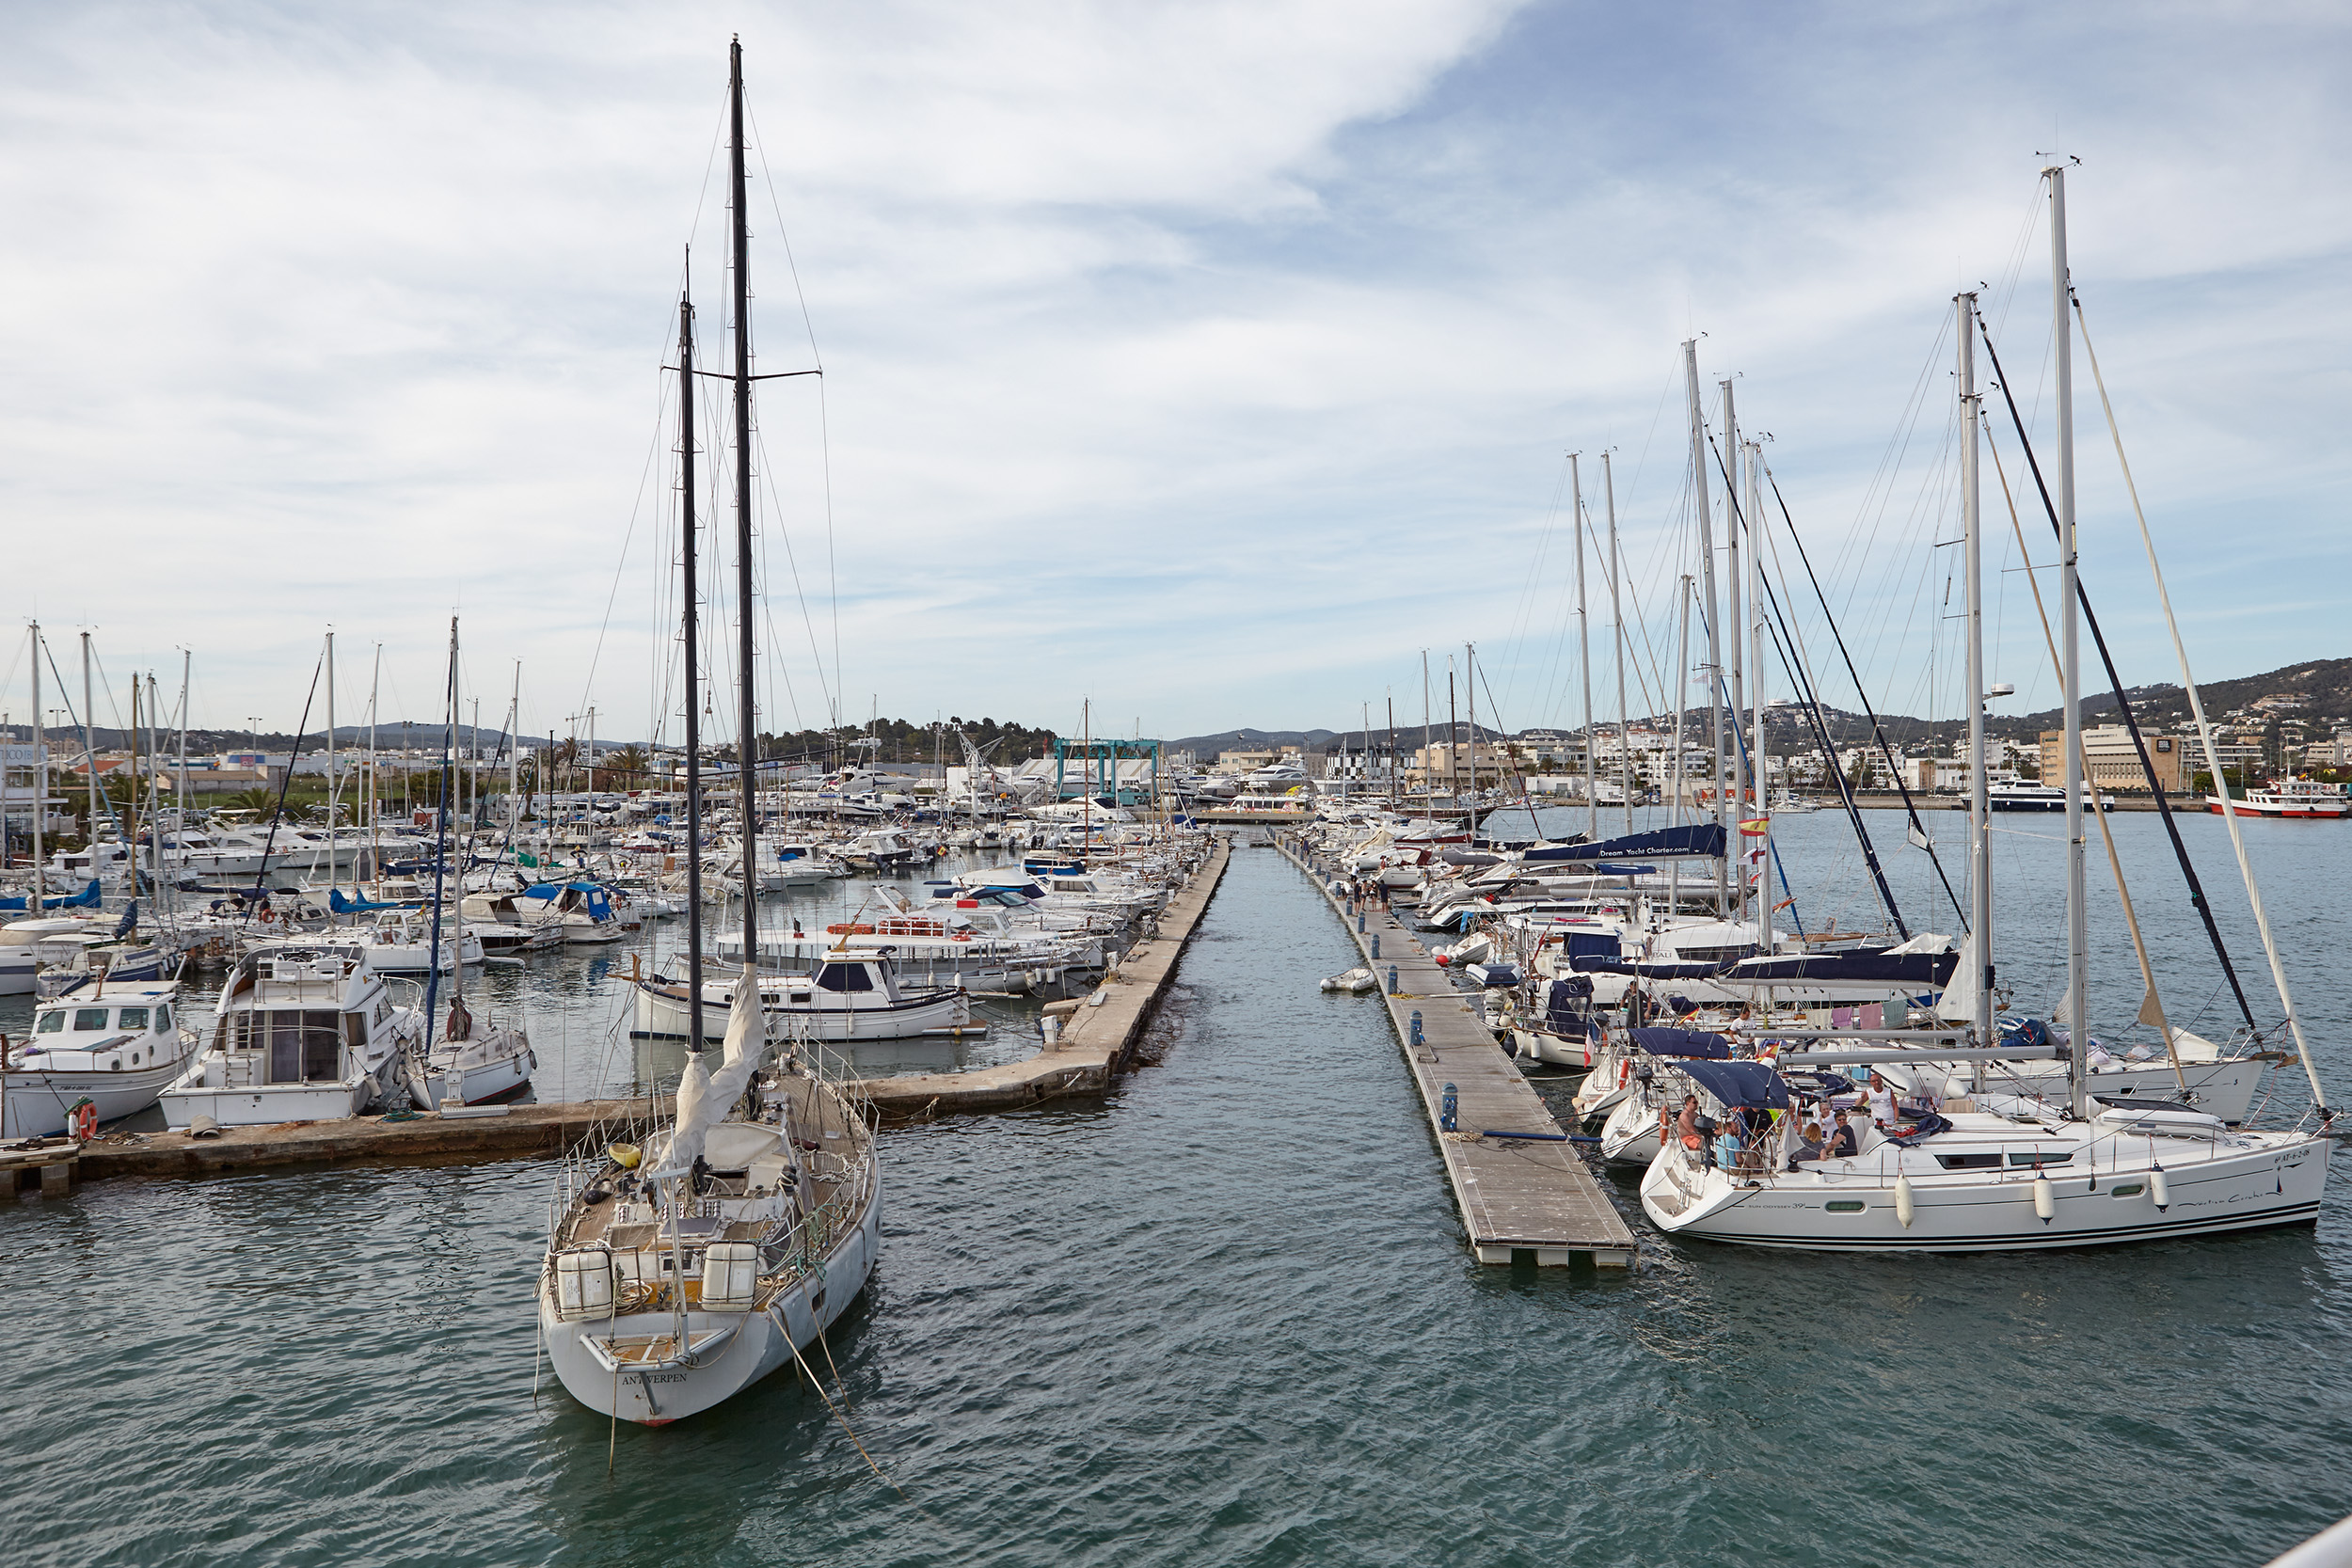 New 20-day deadline for submitting offers for the management of small and medium-length moorings in the port of Eivissa